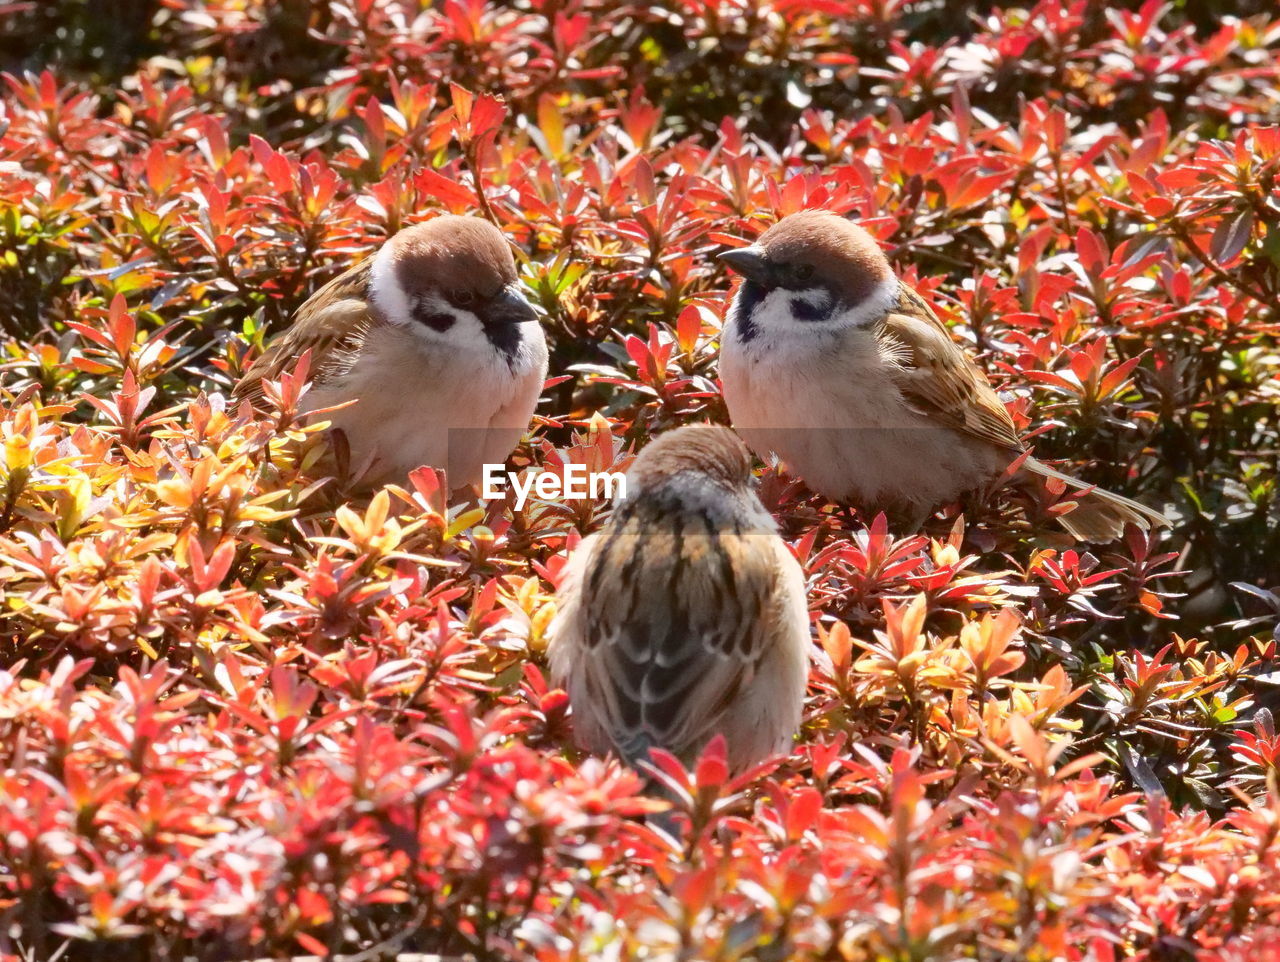 Sparrows have a meeting